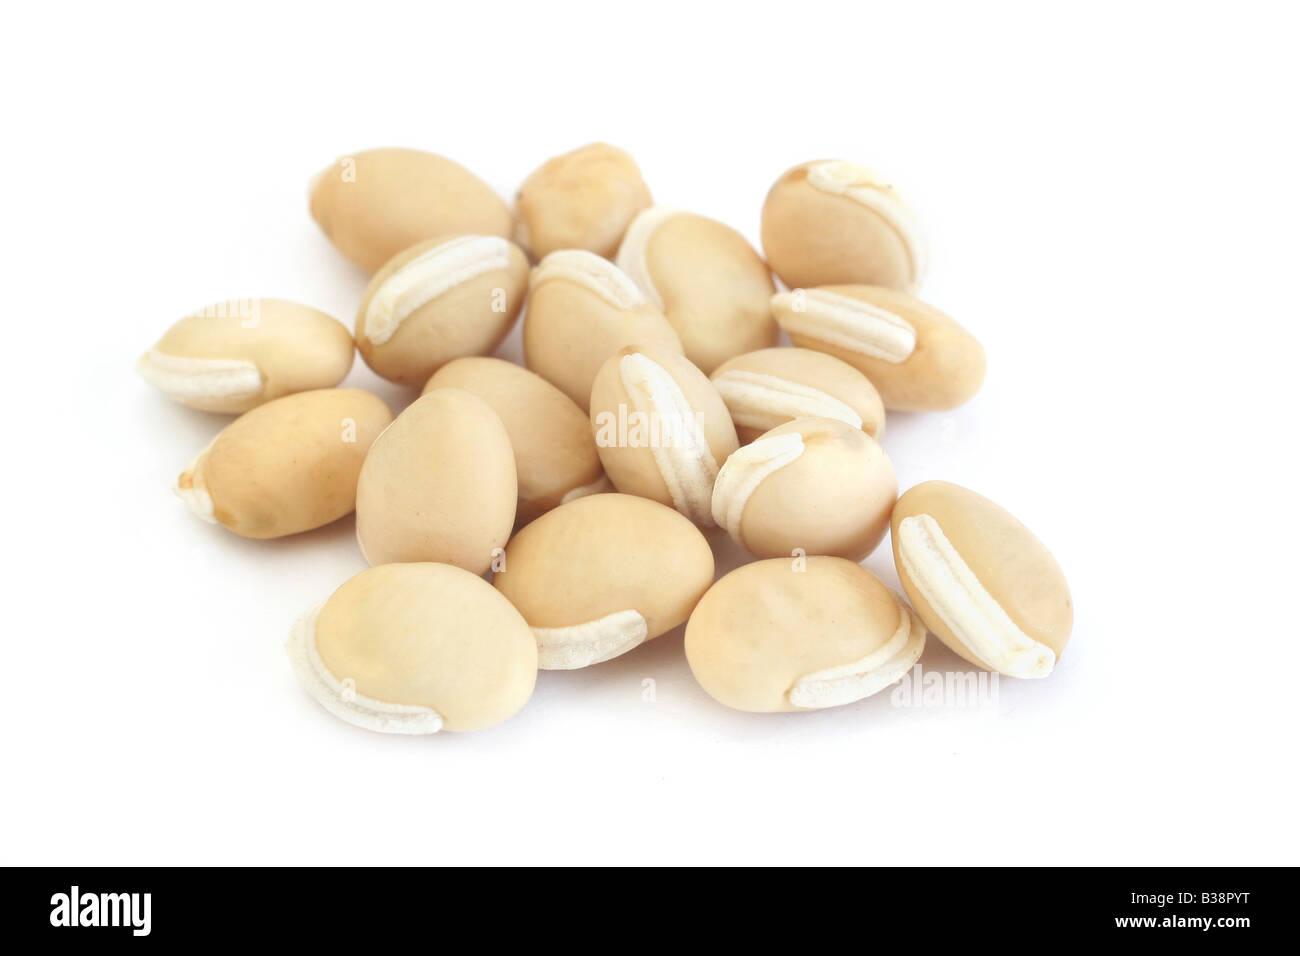 Lab lab beans (also called hyacinth beans) isolated on white background Stock Photo